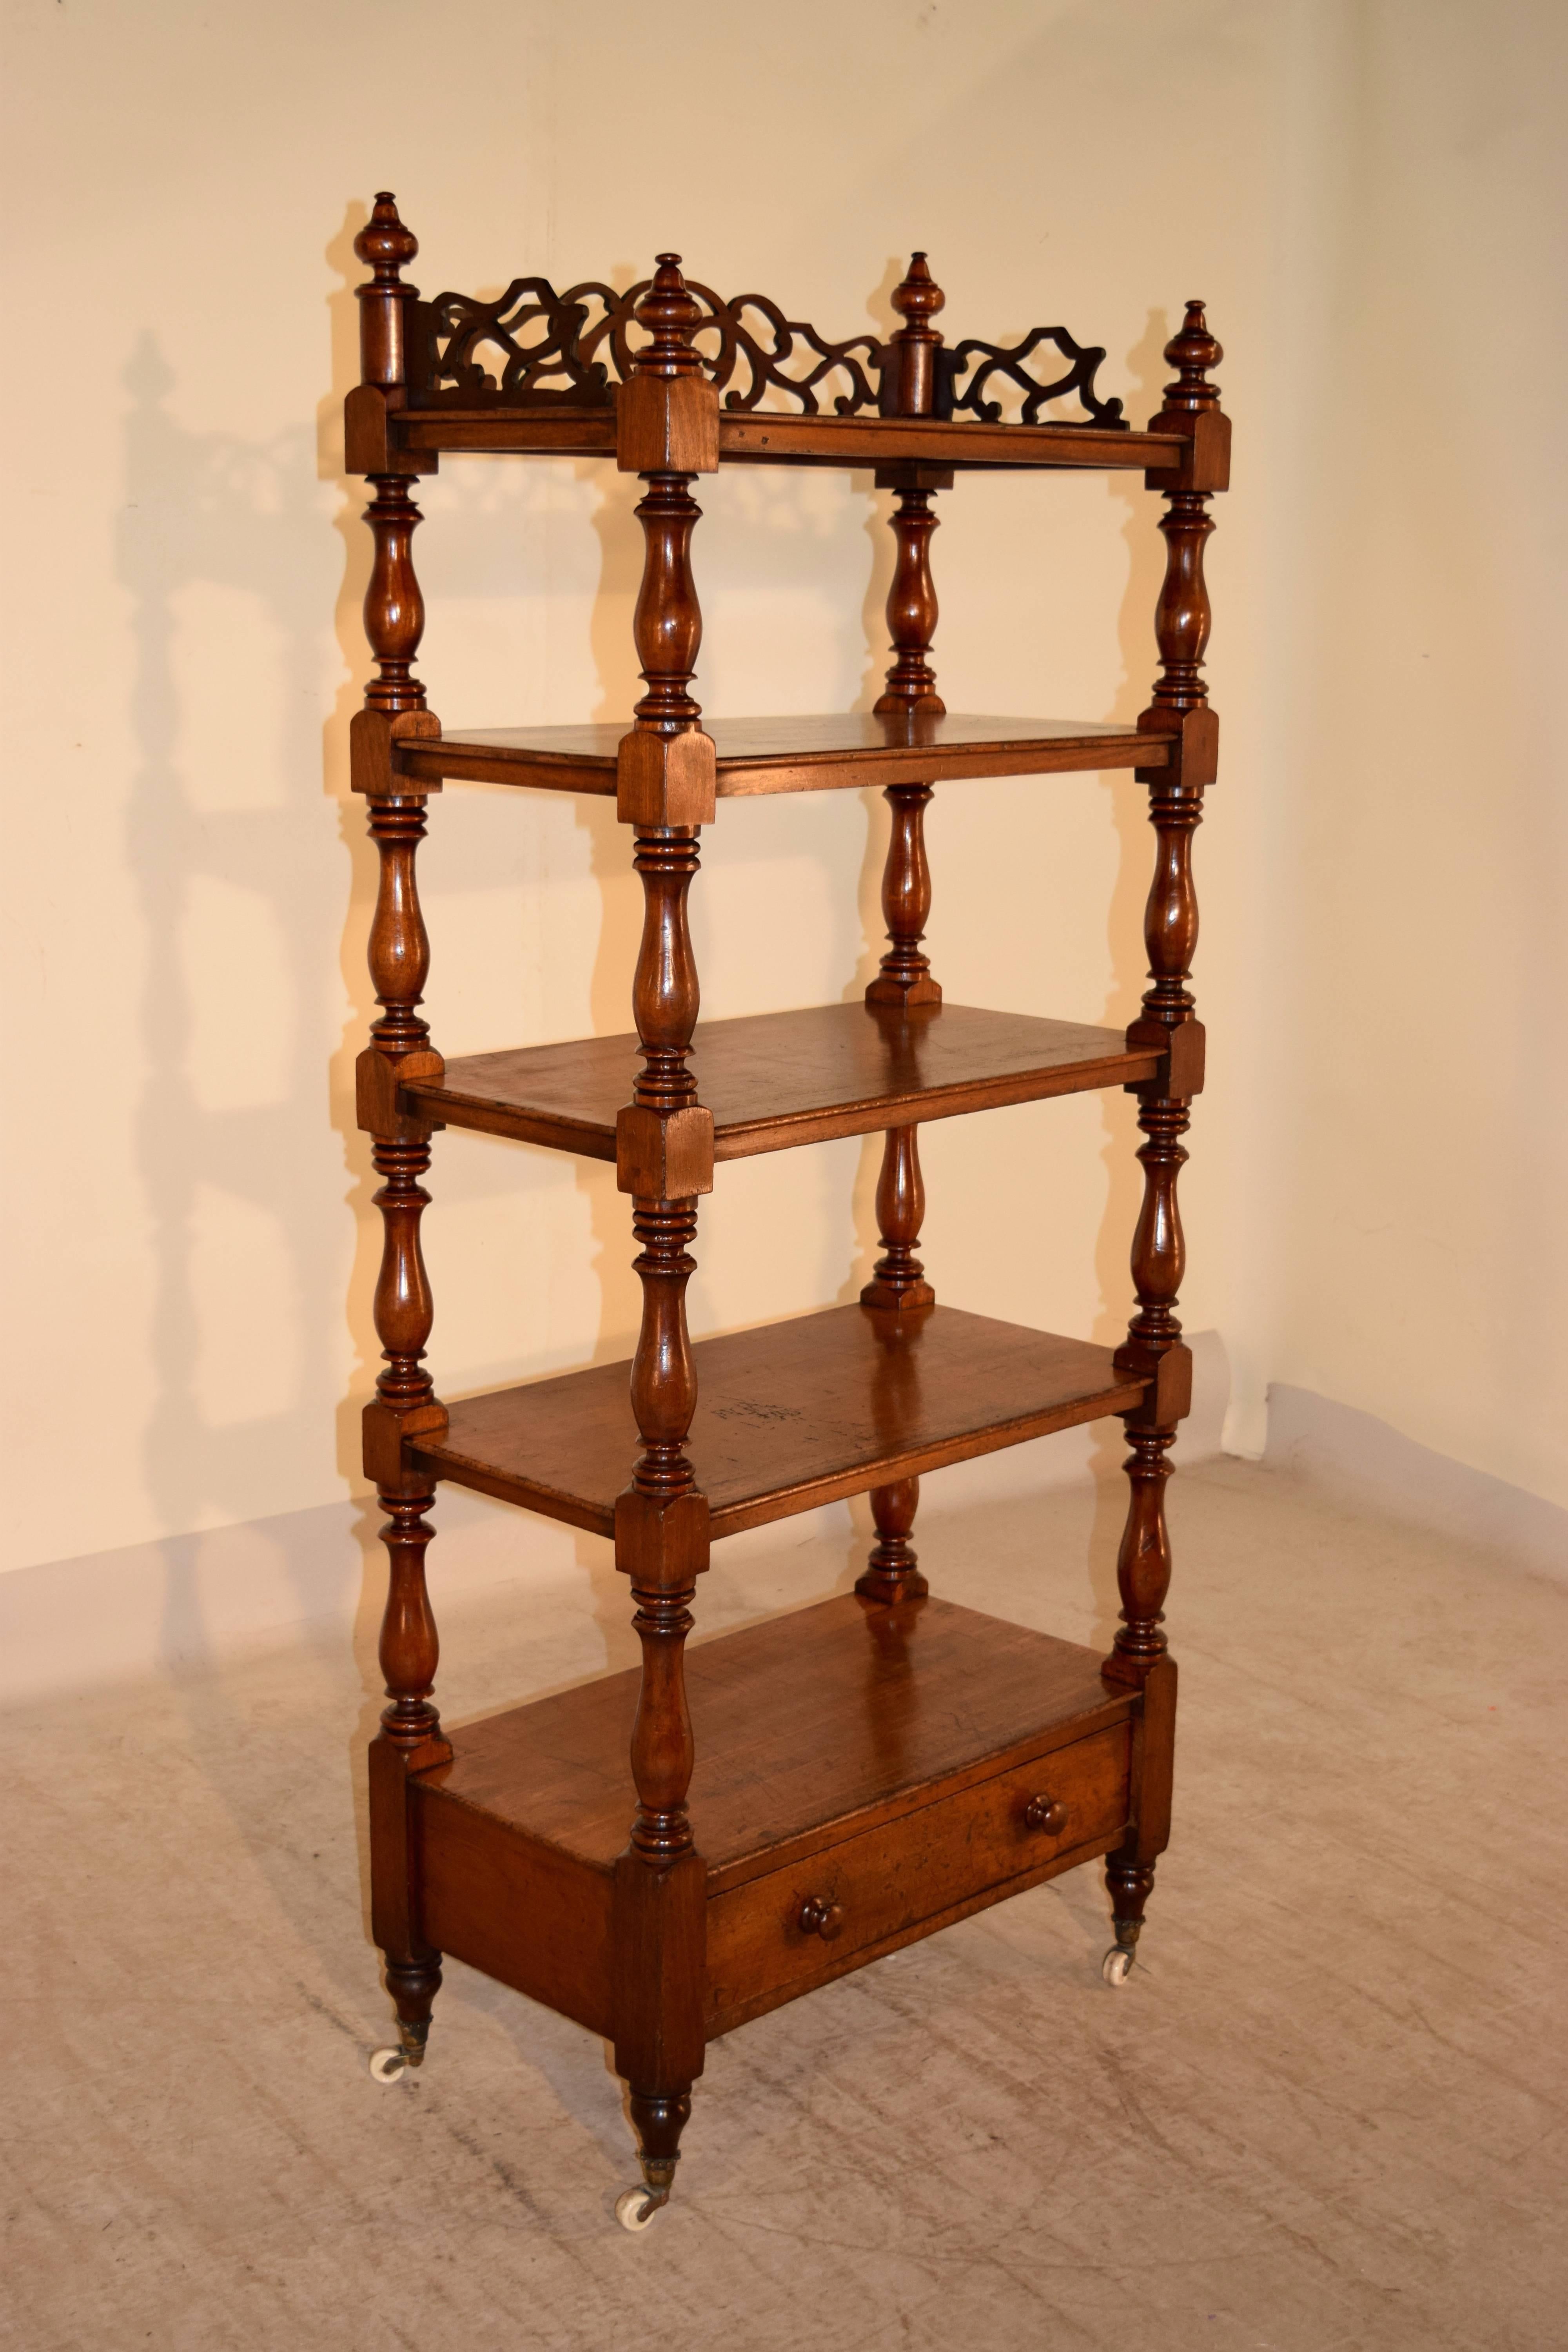 19th Century English mahogany etagere with wonderful fretwork around the top shelf, decorated with finials, following down to four lower shelves, with a drawer underneath. It has wonderfully hand-turned shelf supports and feet, which end in the